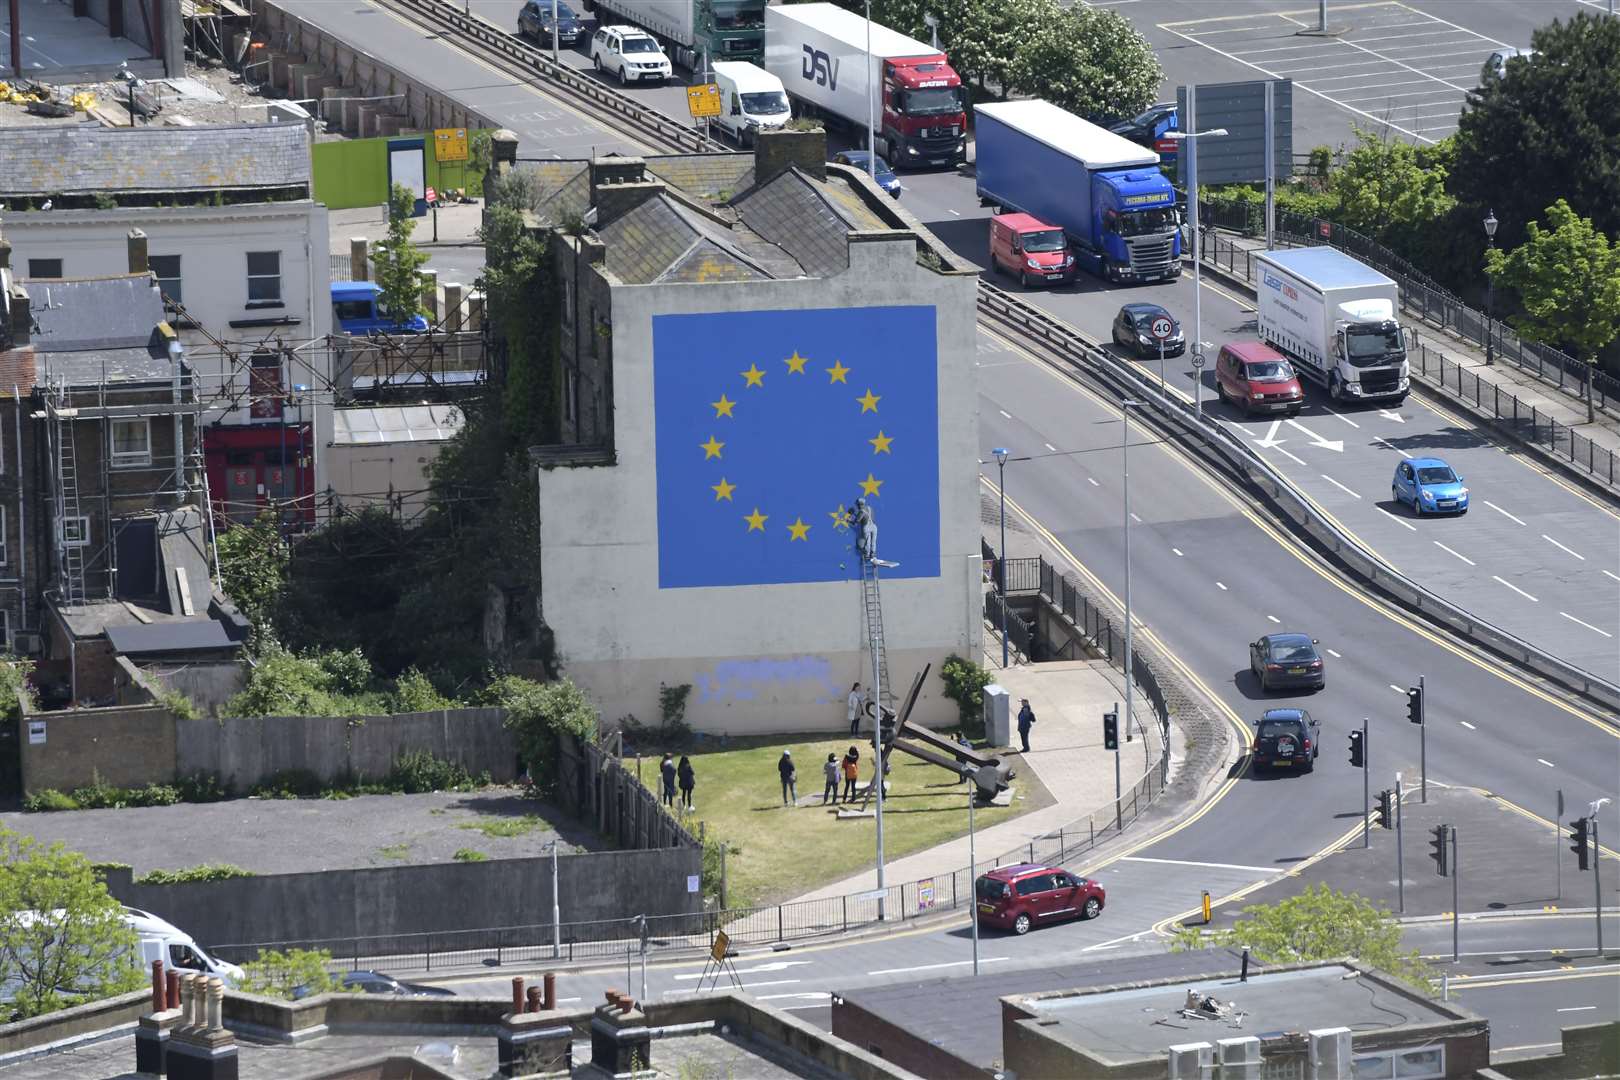 Will it stay or will it go? The Dover Banksy is crumbling away while answers are being found